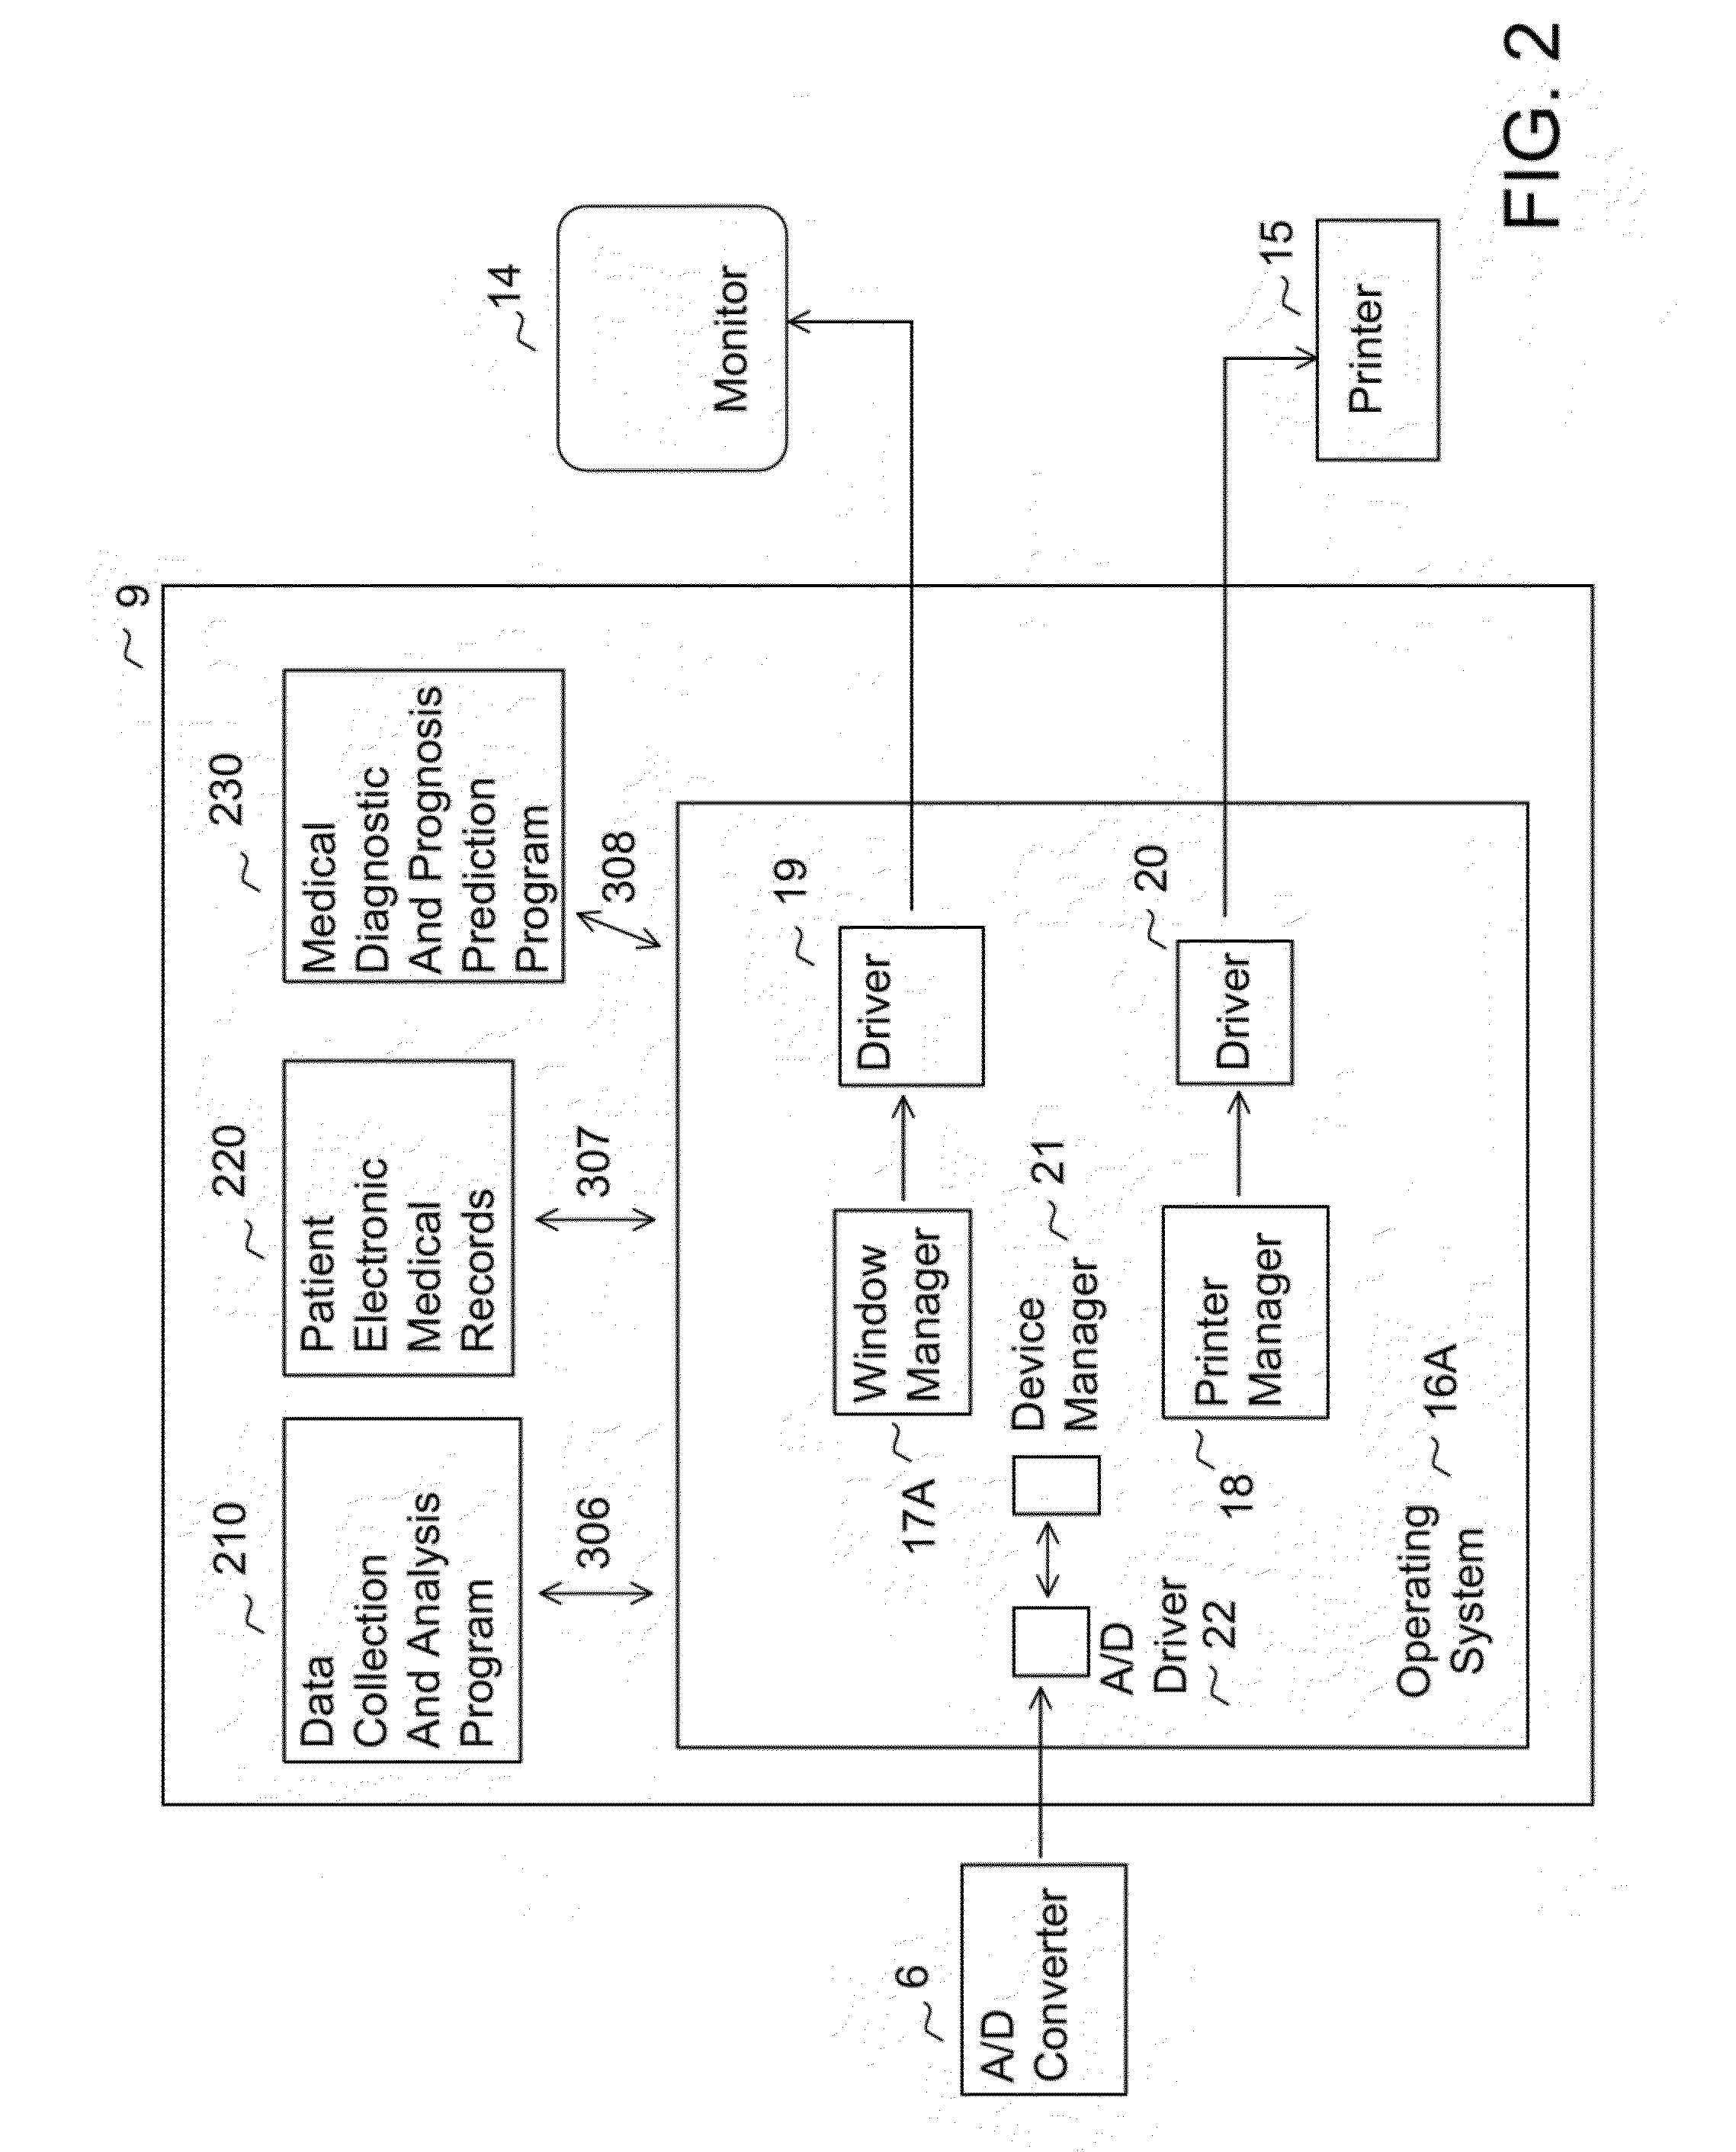 Apparatus for acquiring and processing of physiological auditory signals